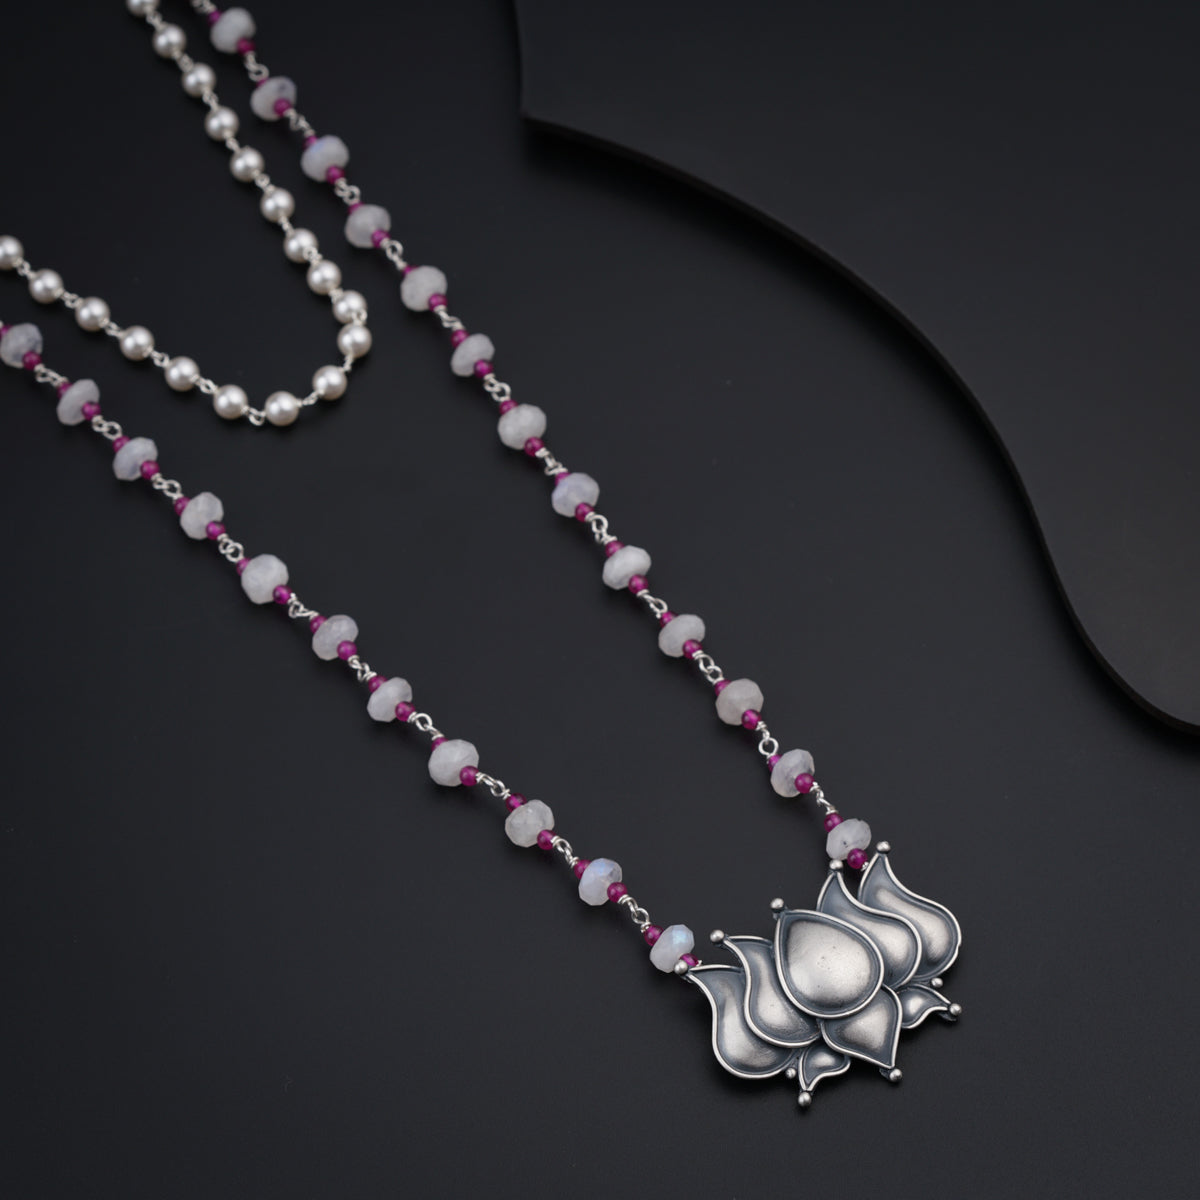 a long necklace with a flower design on it